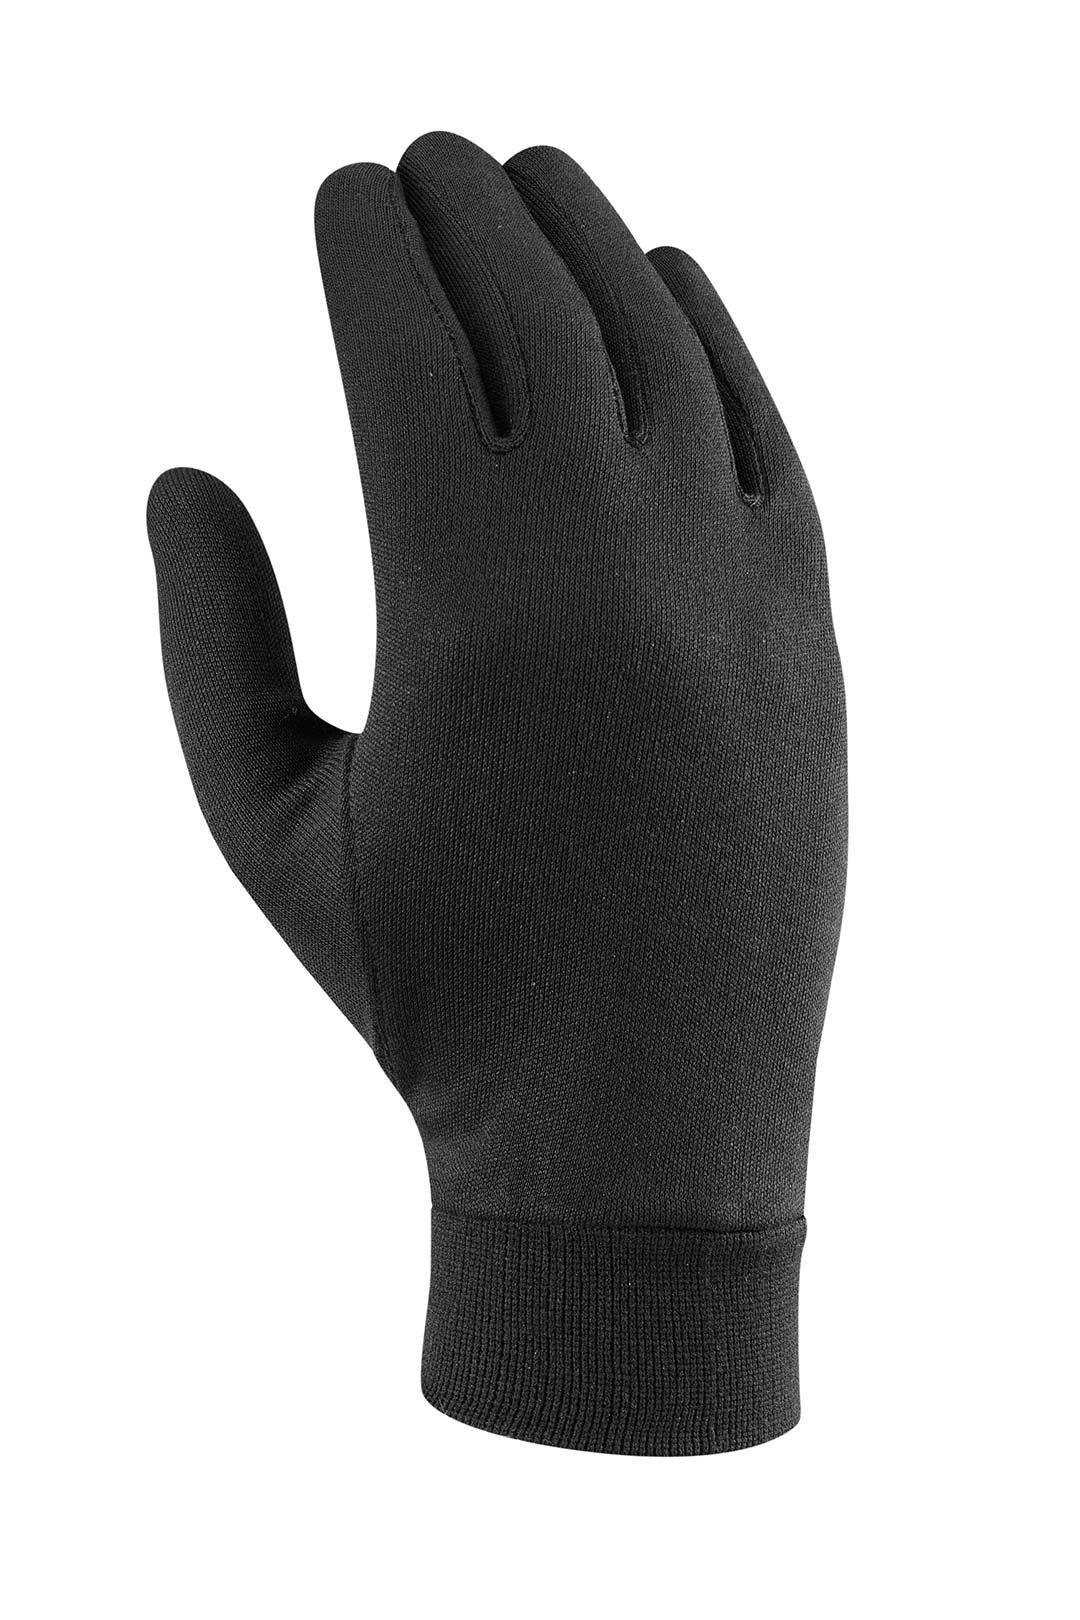 Rab Womens Forge Gloves, UK